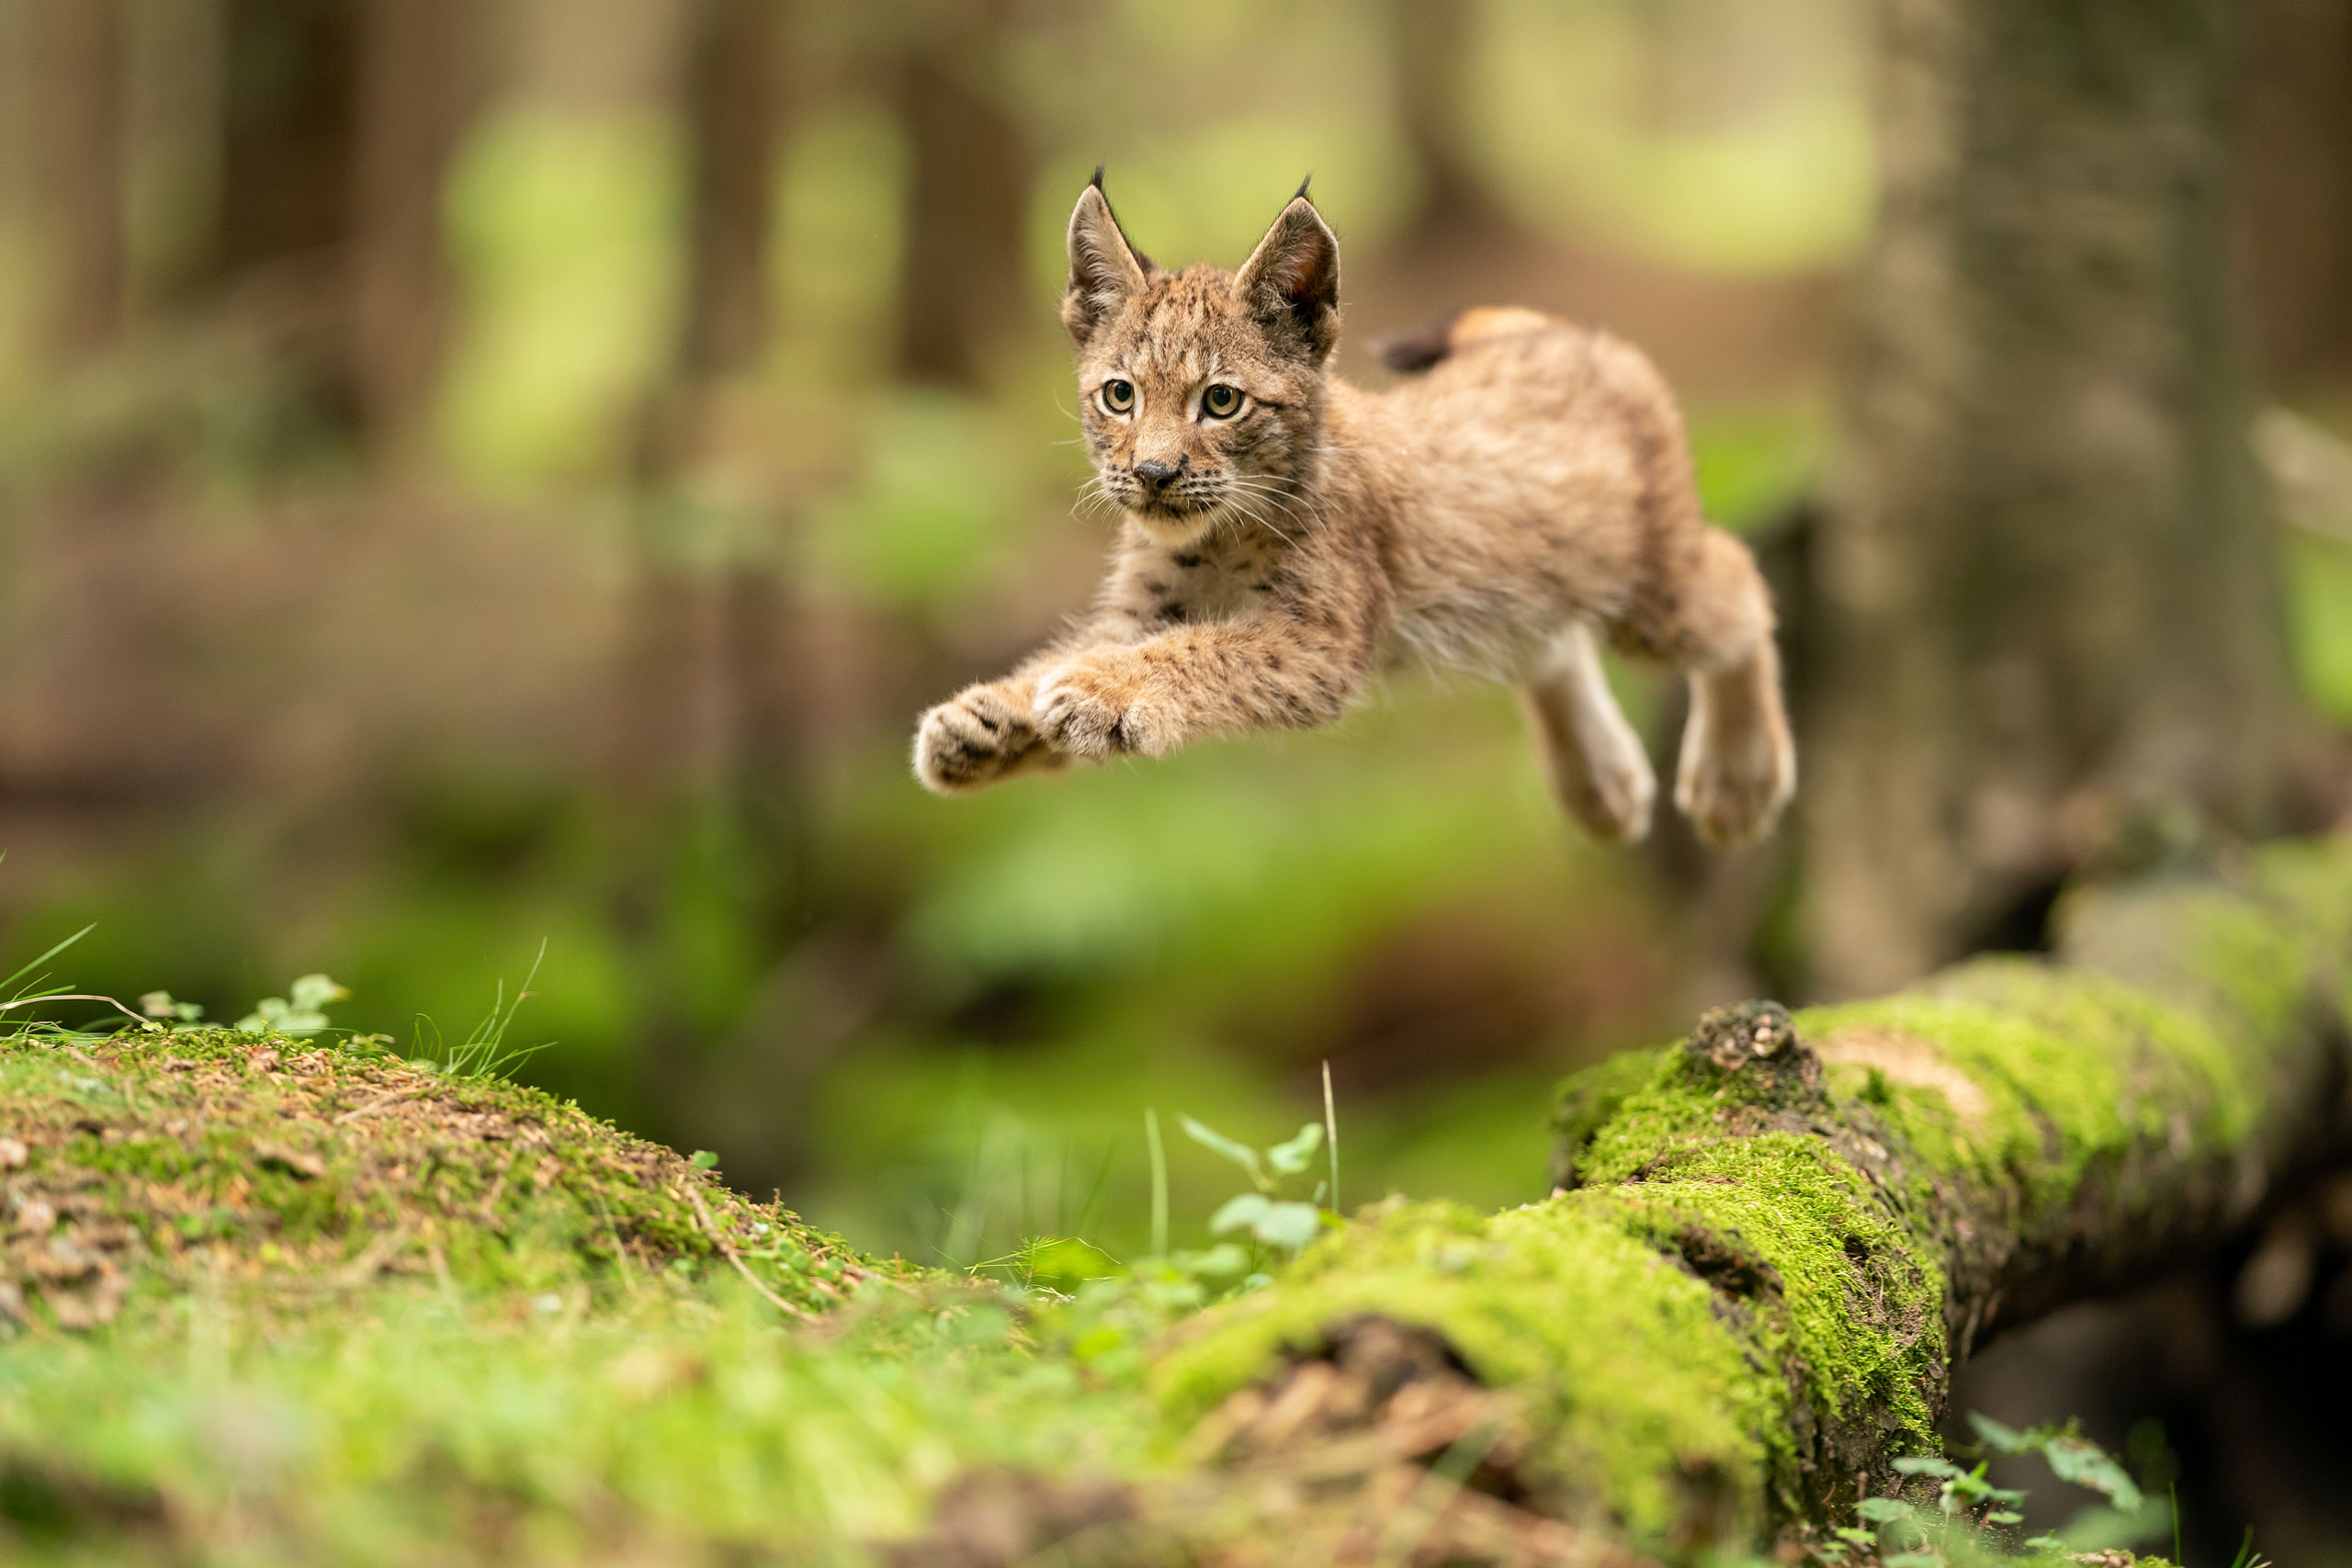 Rewilding Europe launches ambitious new strategy for 2030 | Rewilding Europe